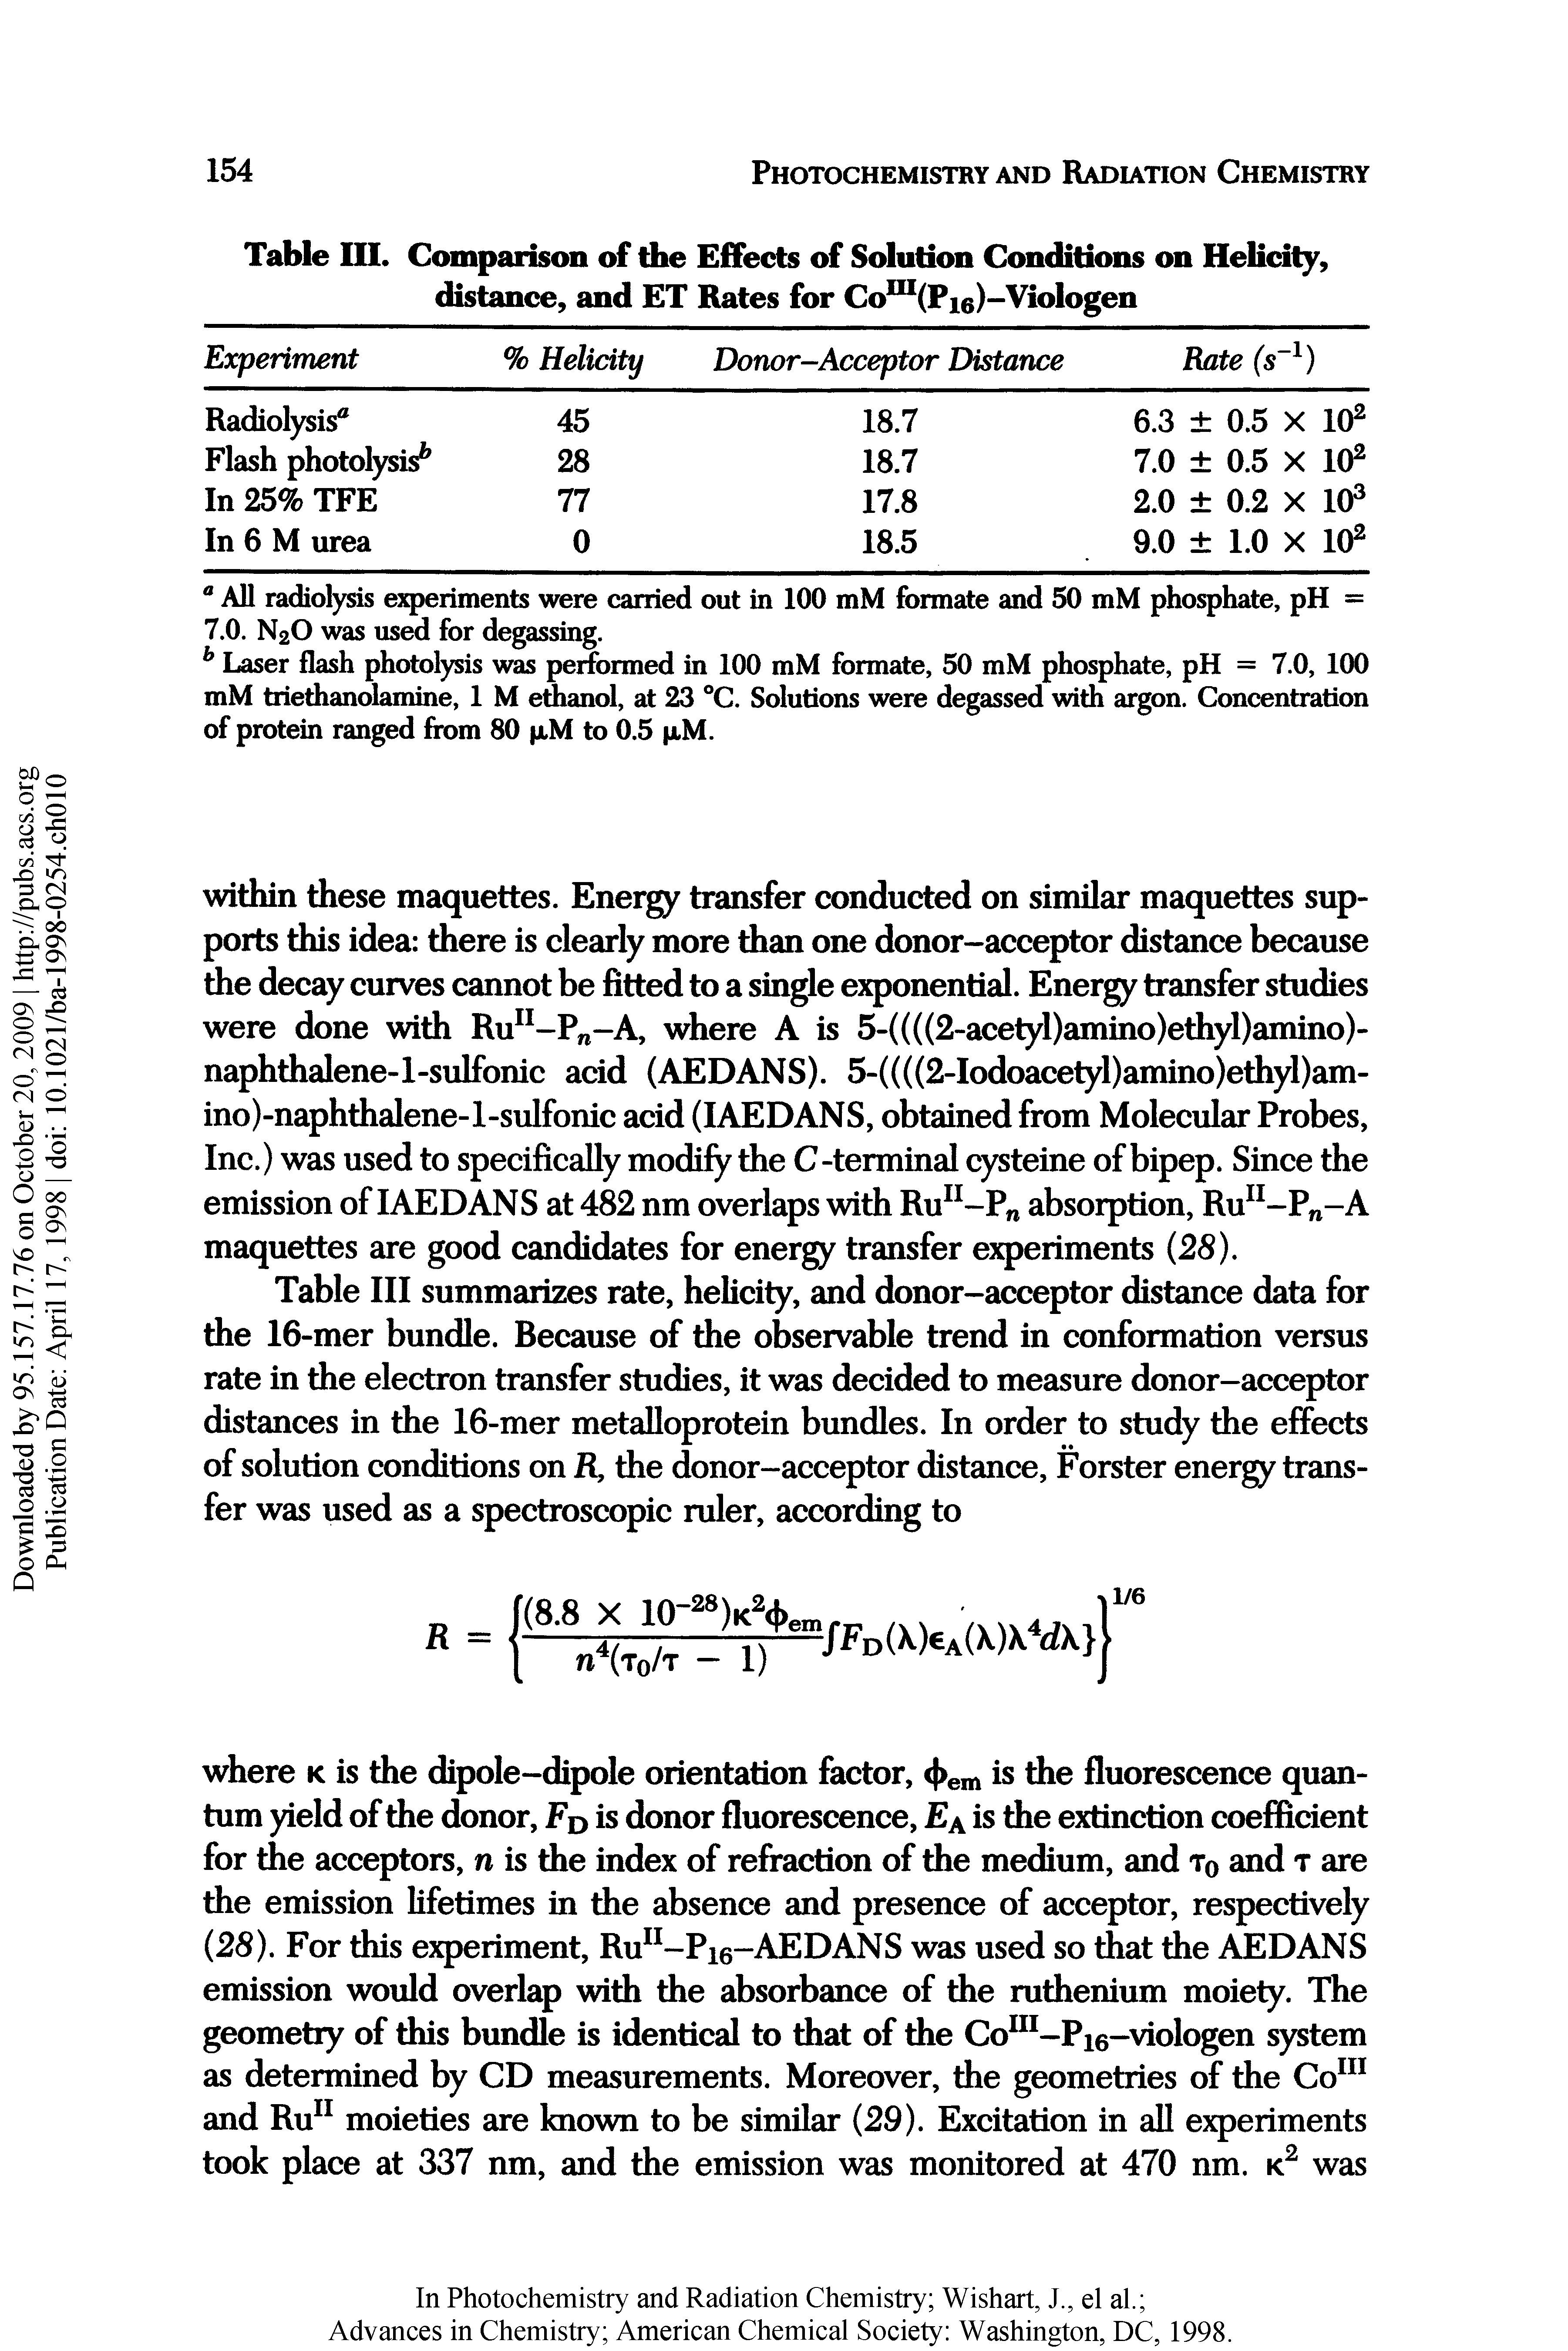 Table III summarizes rate, helicity, and donor-acceptor distance data for the 16-mer bundle. Because of the observable trend in conformation versus rate in the electron transfer studies, it was decided to measure donor-acceptor distances in the 16-mer metalloprotein bundles. In order to study the effects of solution conditions on H, the donor-acceptor distance, Forster energy transfer was used as a spectroscopic ruler, according to...